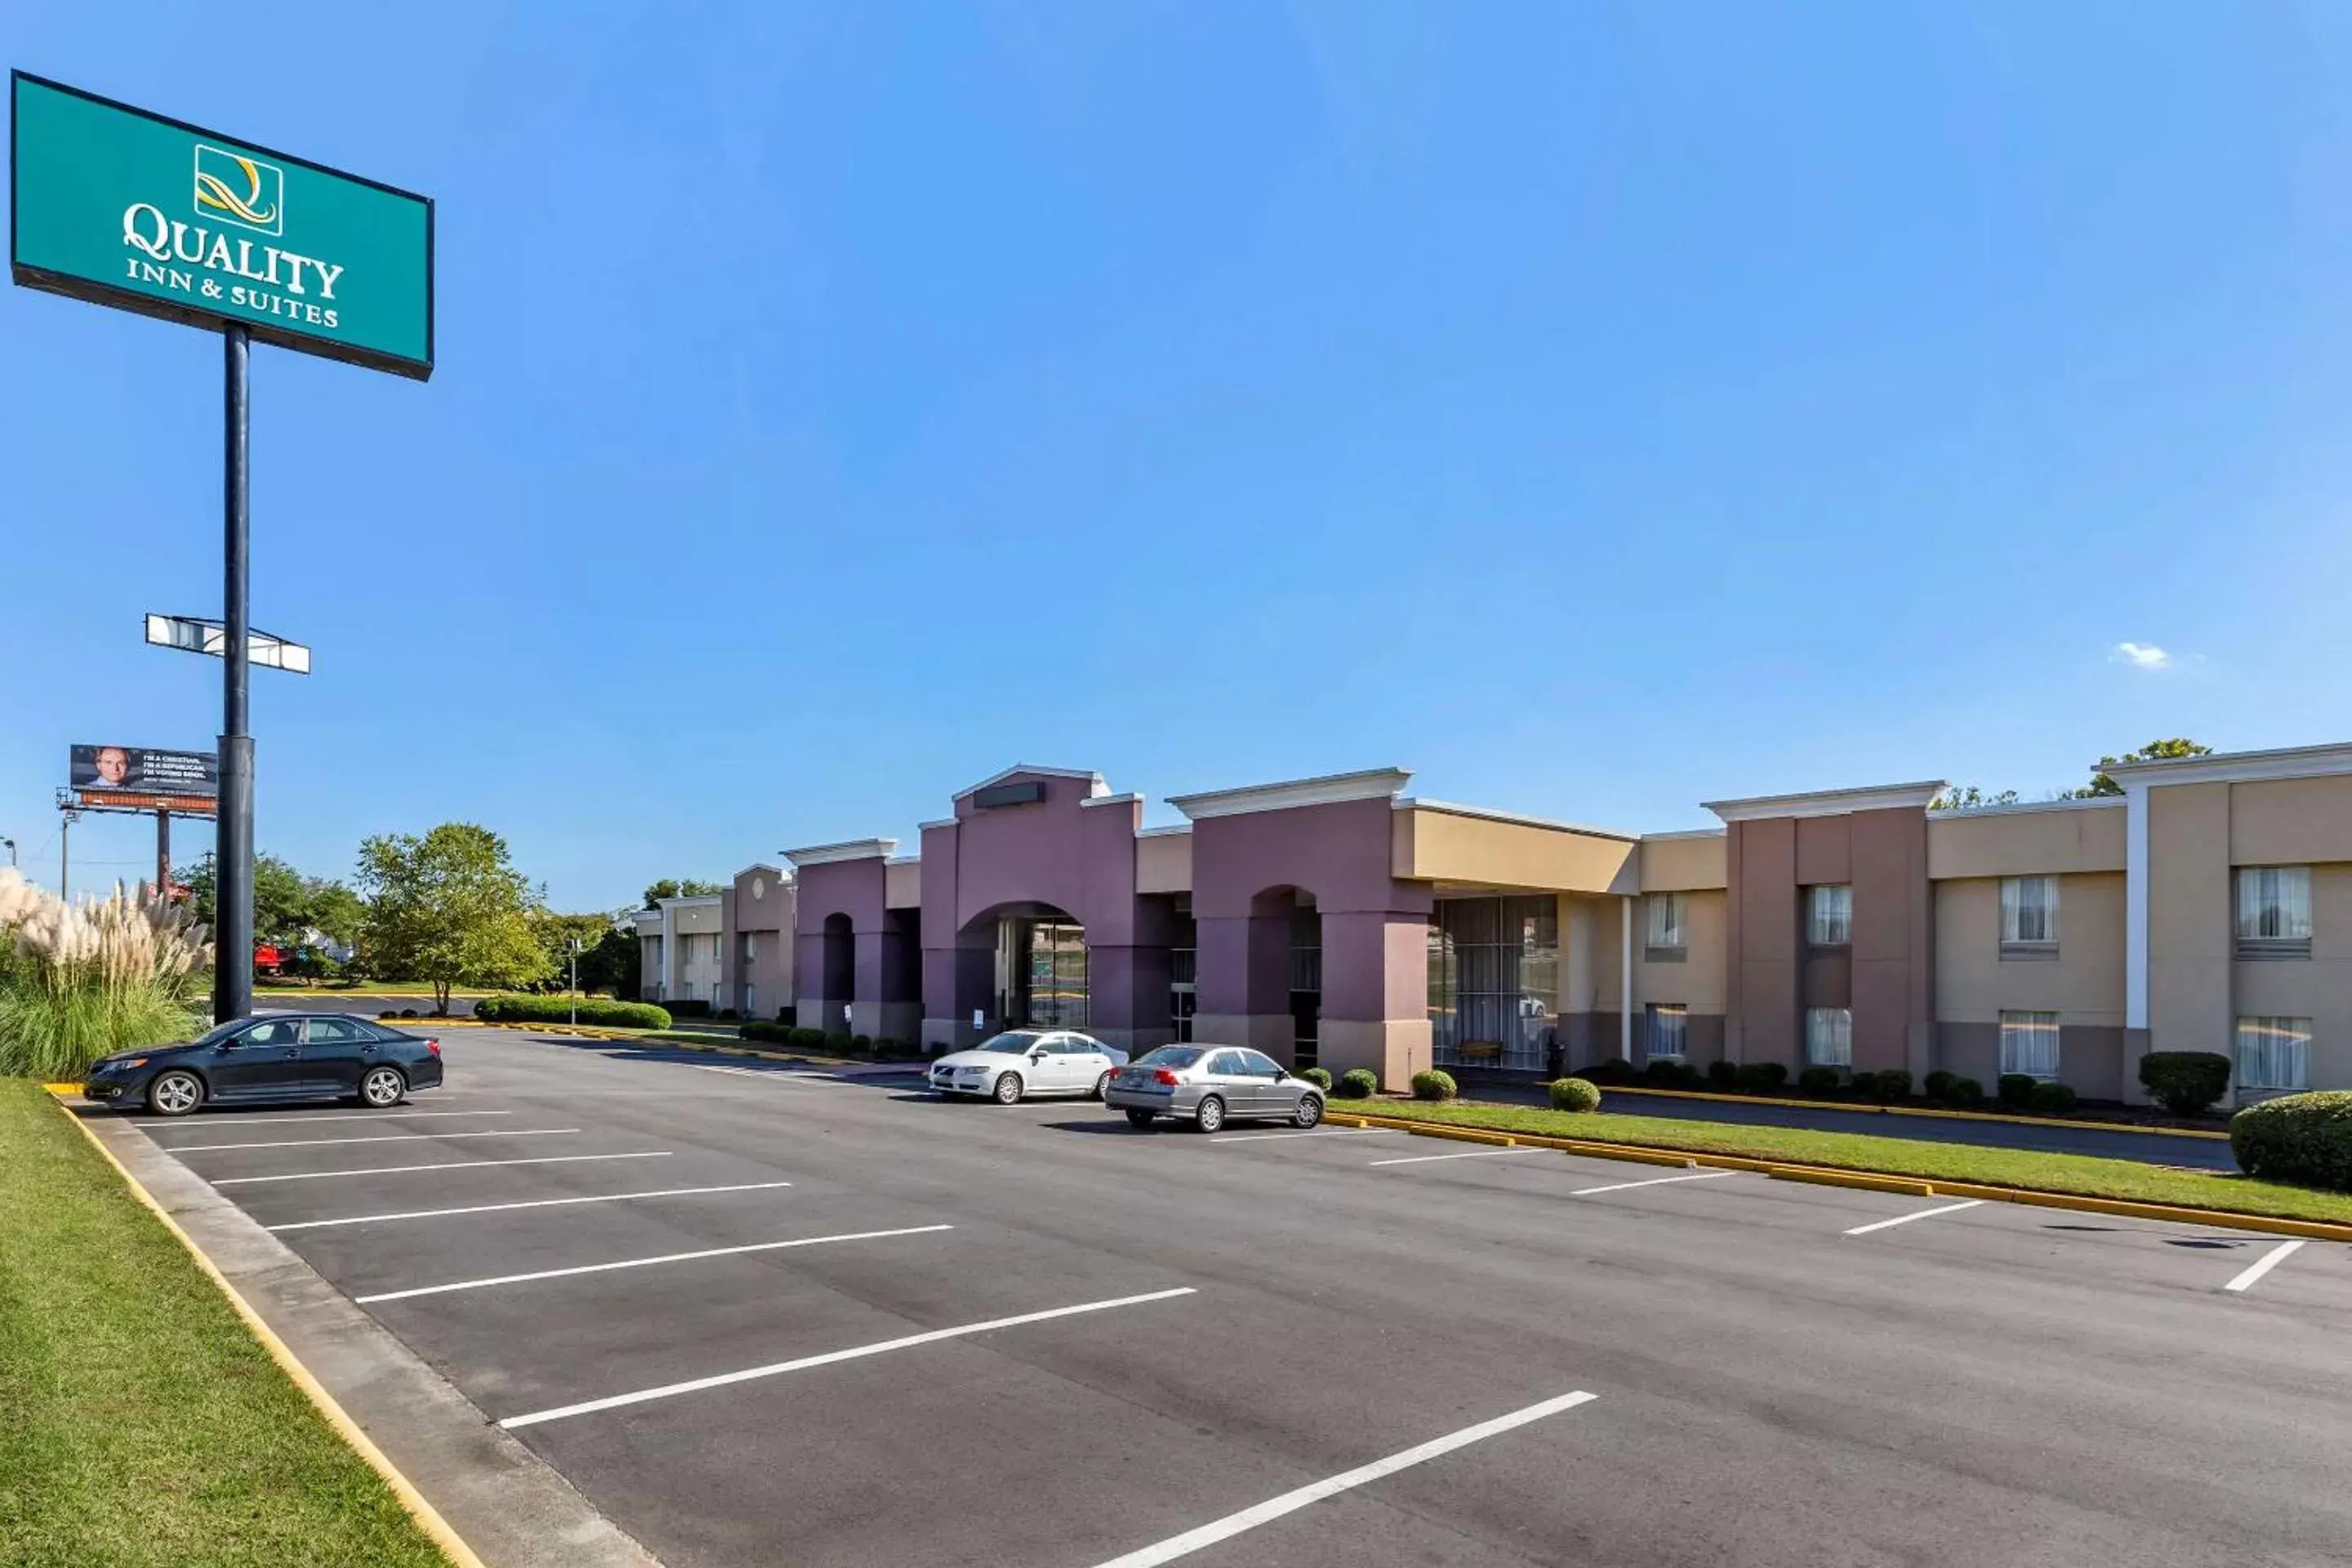 Property building, Neighborhood in Quality Inn & Suites - Greensboro-High Point